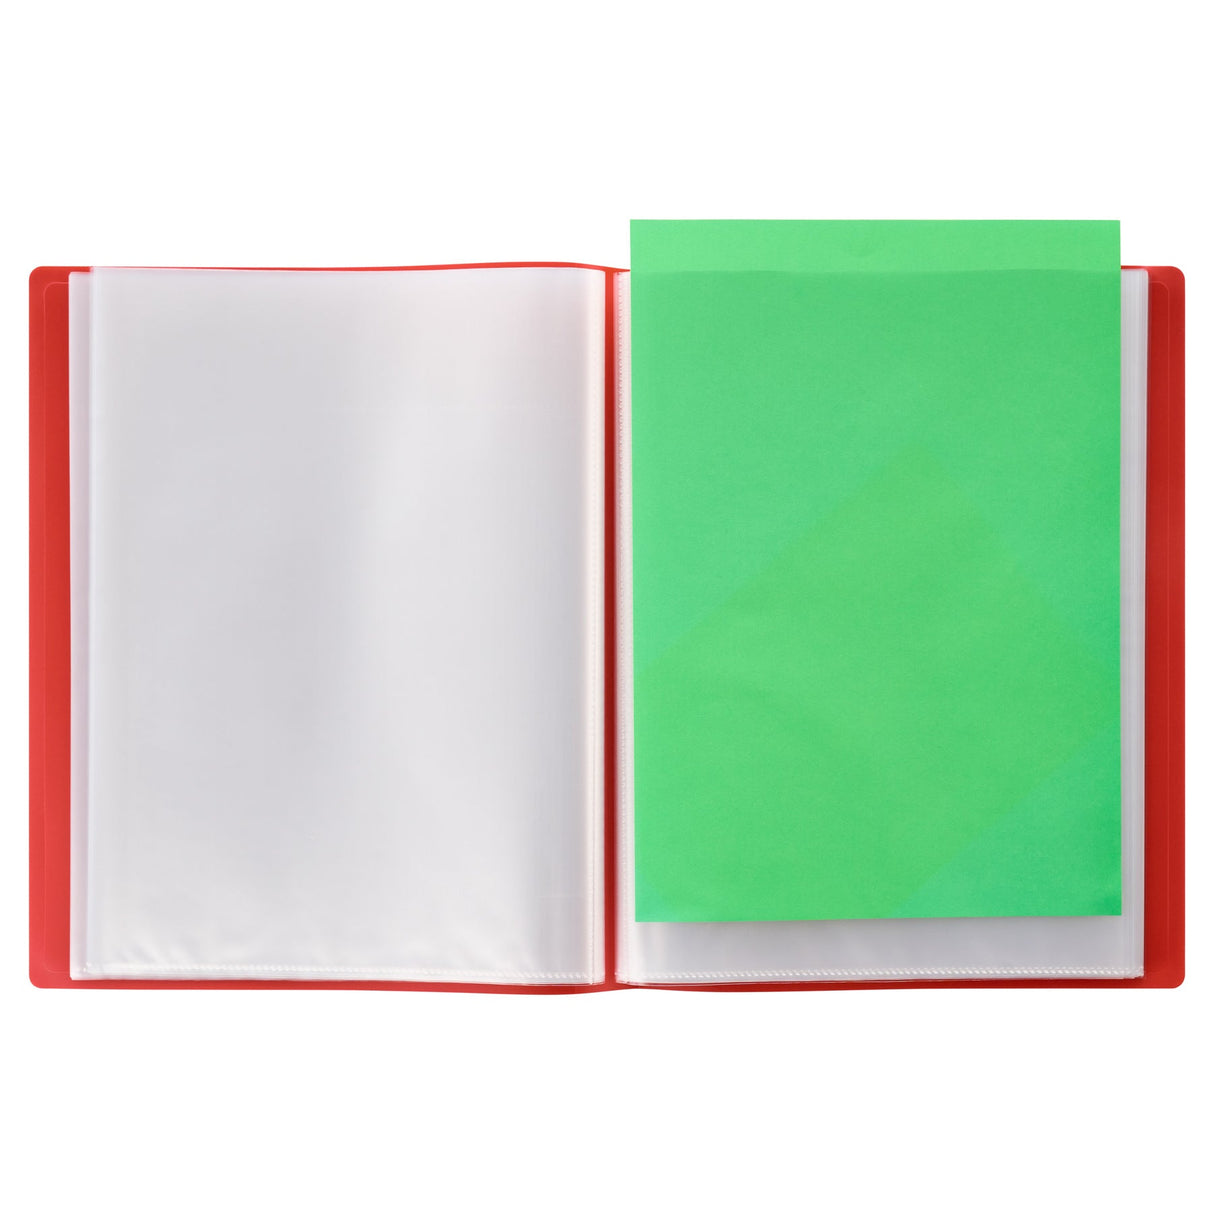 Concept A4 Display Book - Red Soft Cover - 60 Pockets-Display Books-Concept|StationeryShop.co.uk